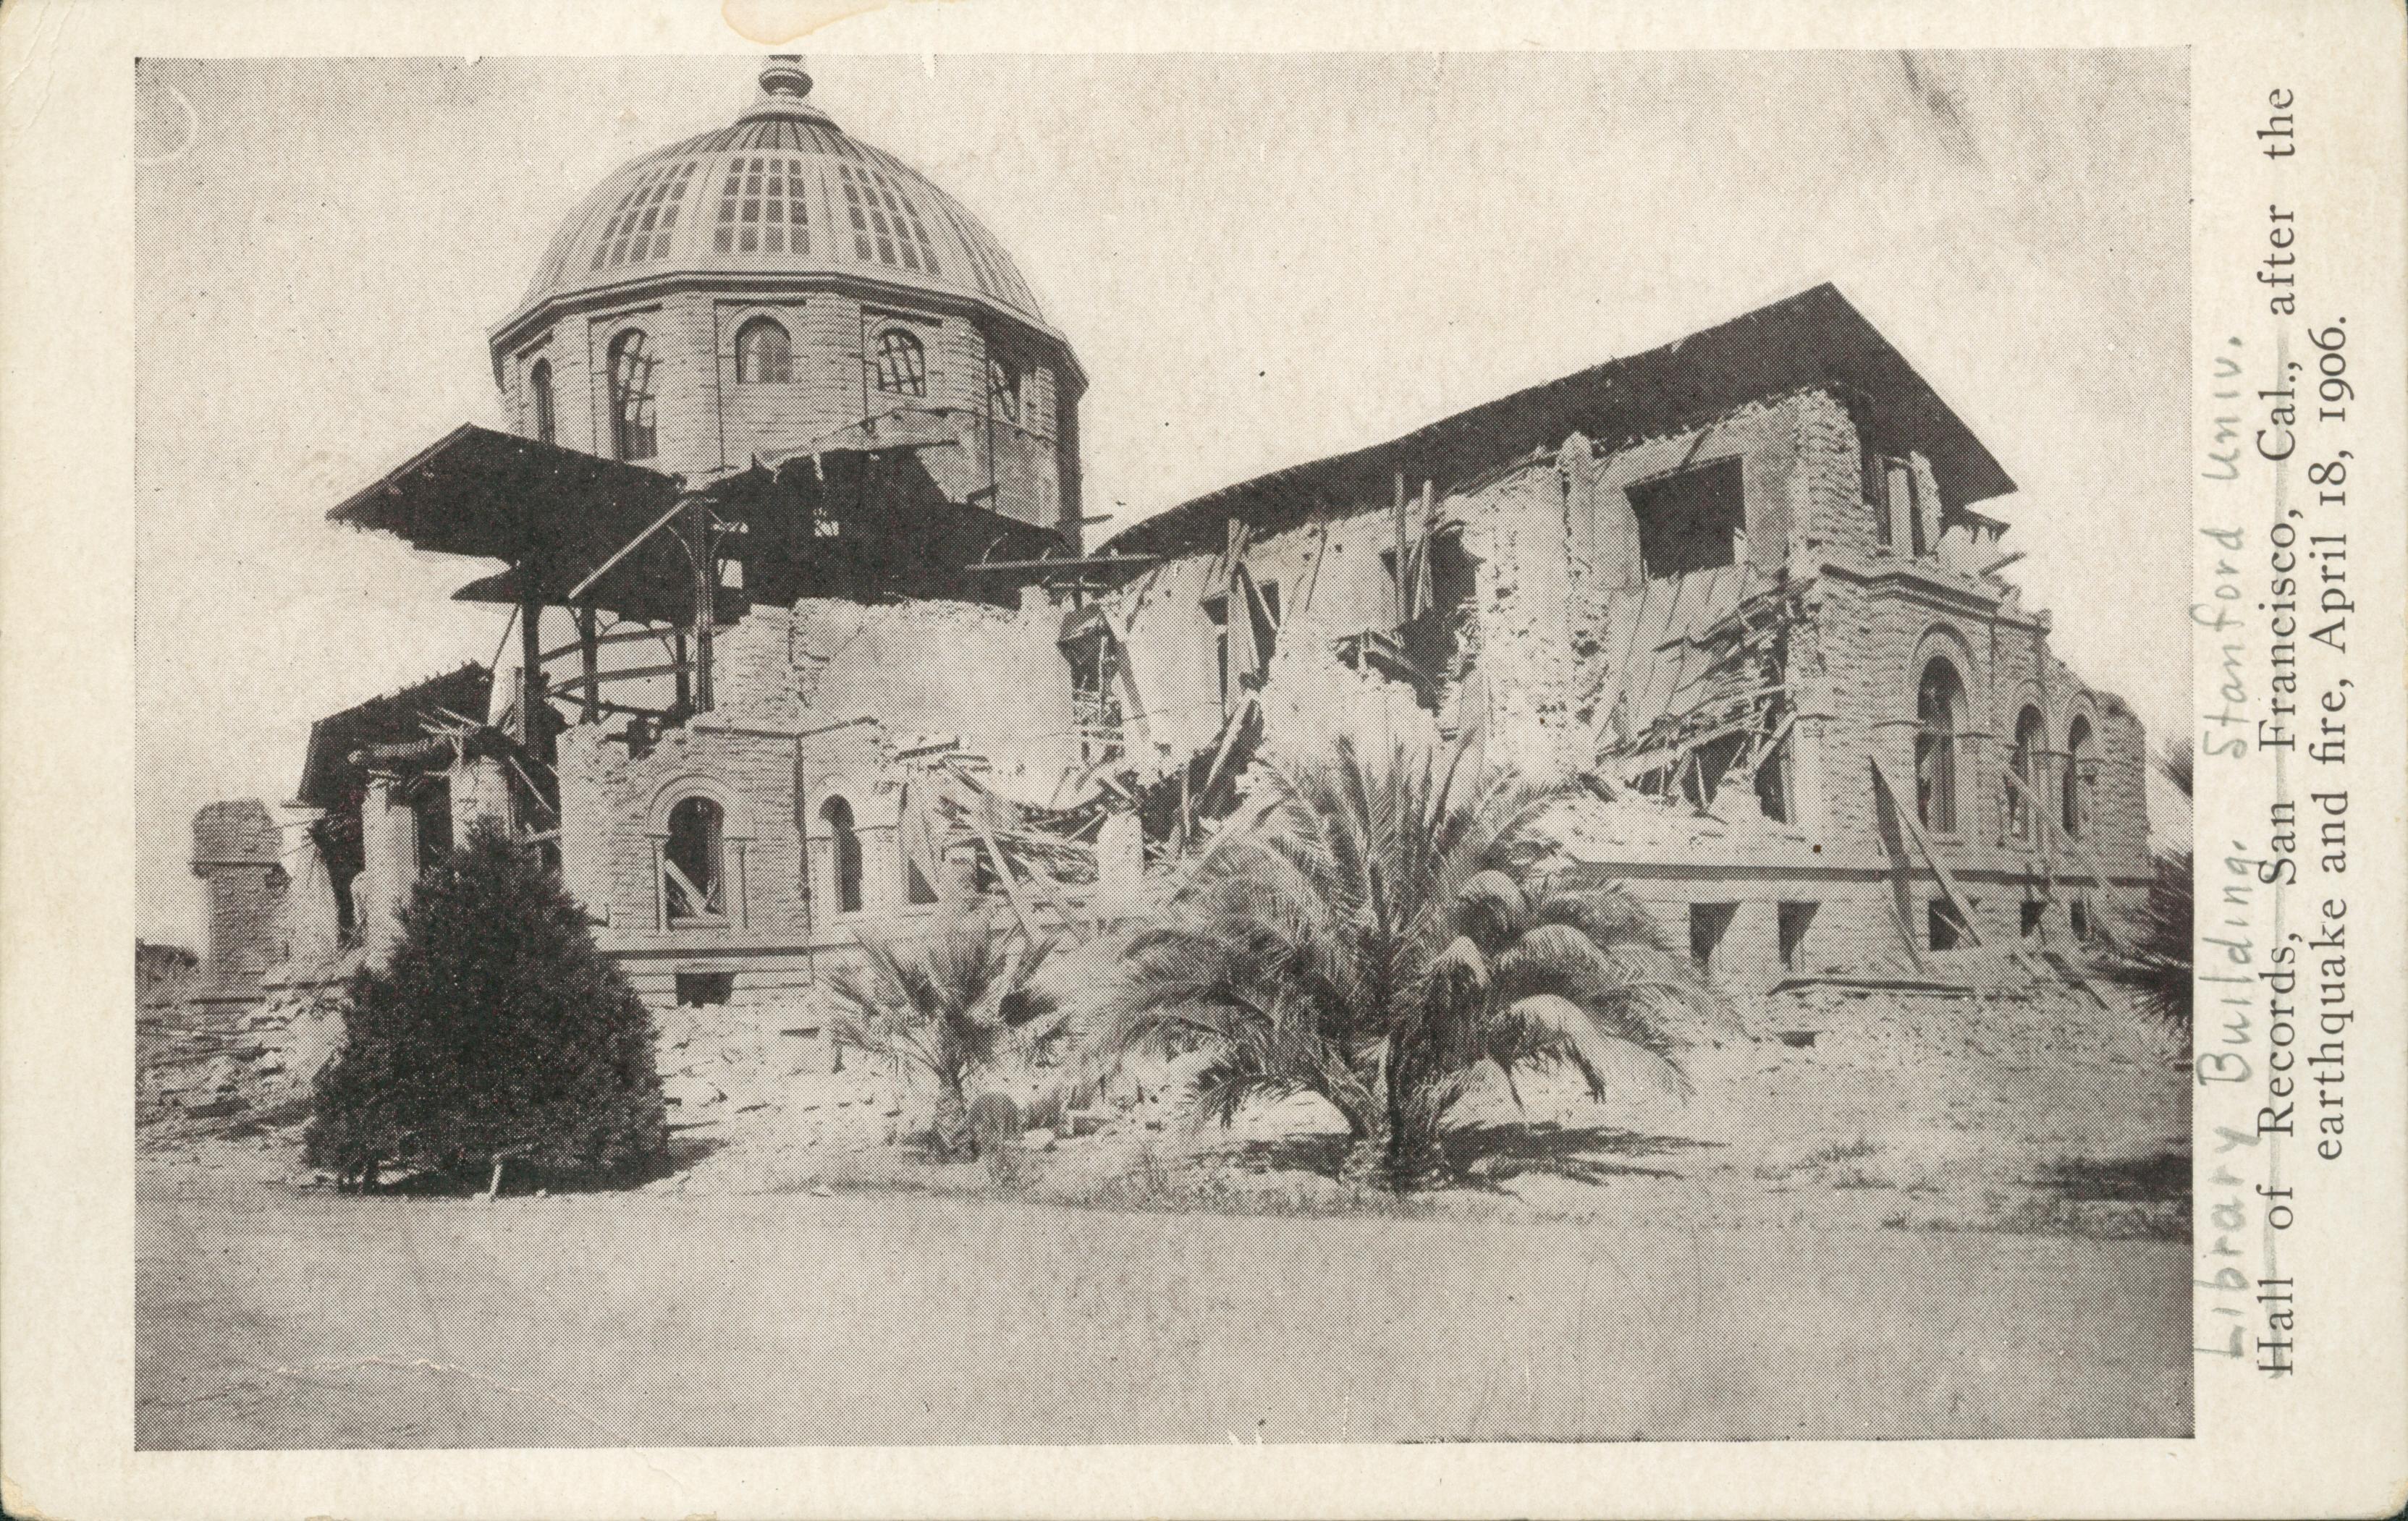 View of the destroyed exterior of the library after the destructive earthquake of 1906.